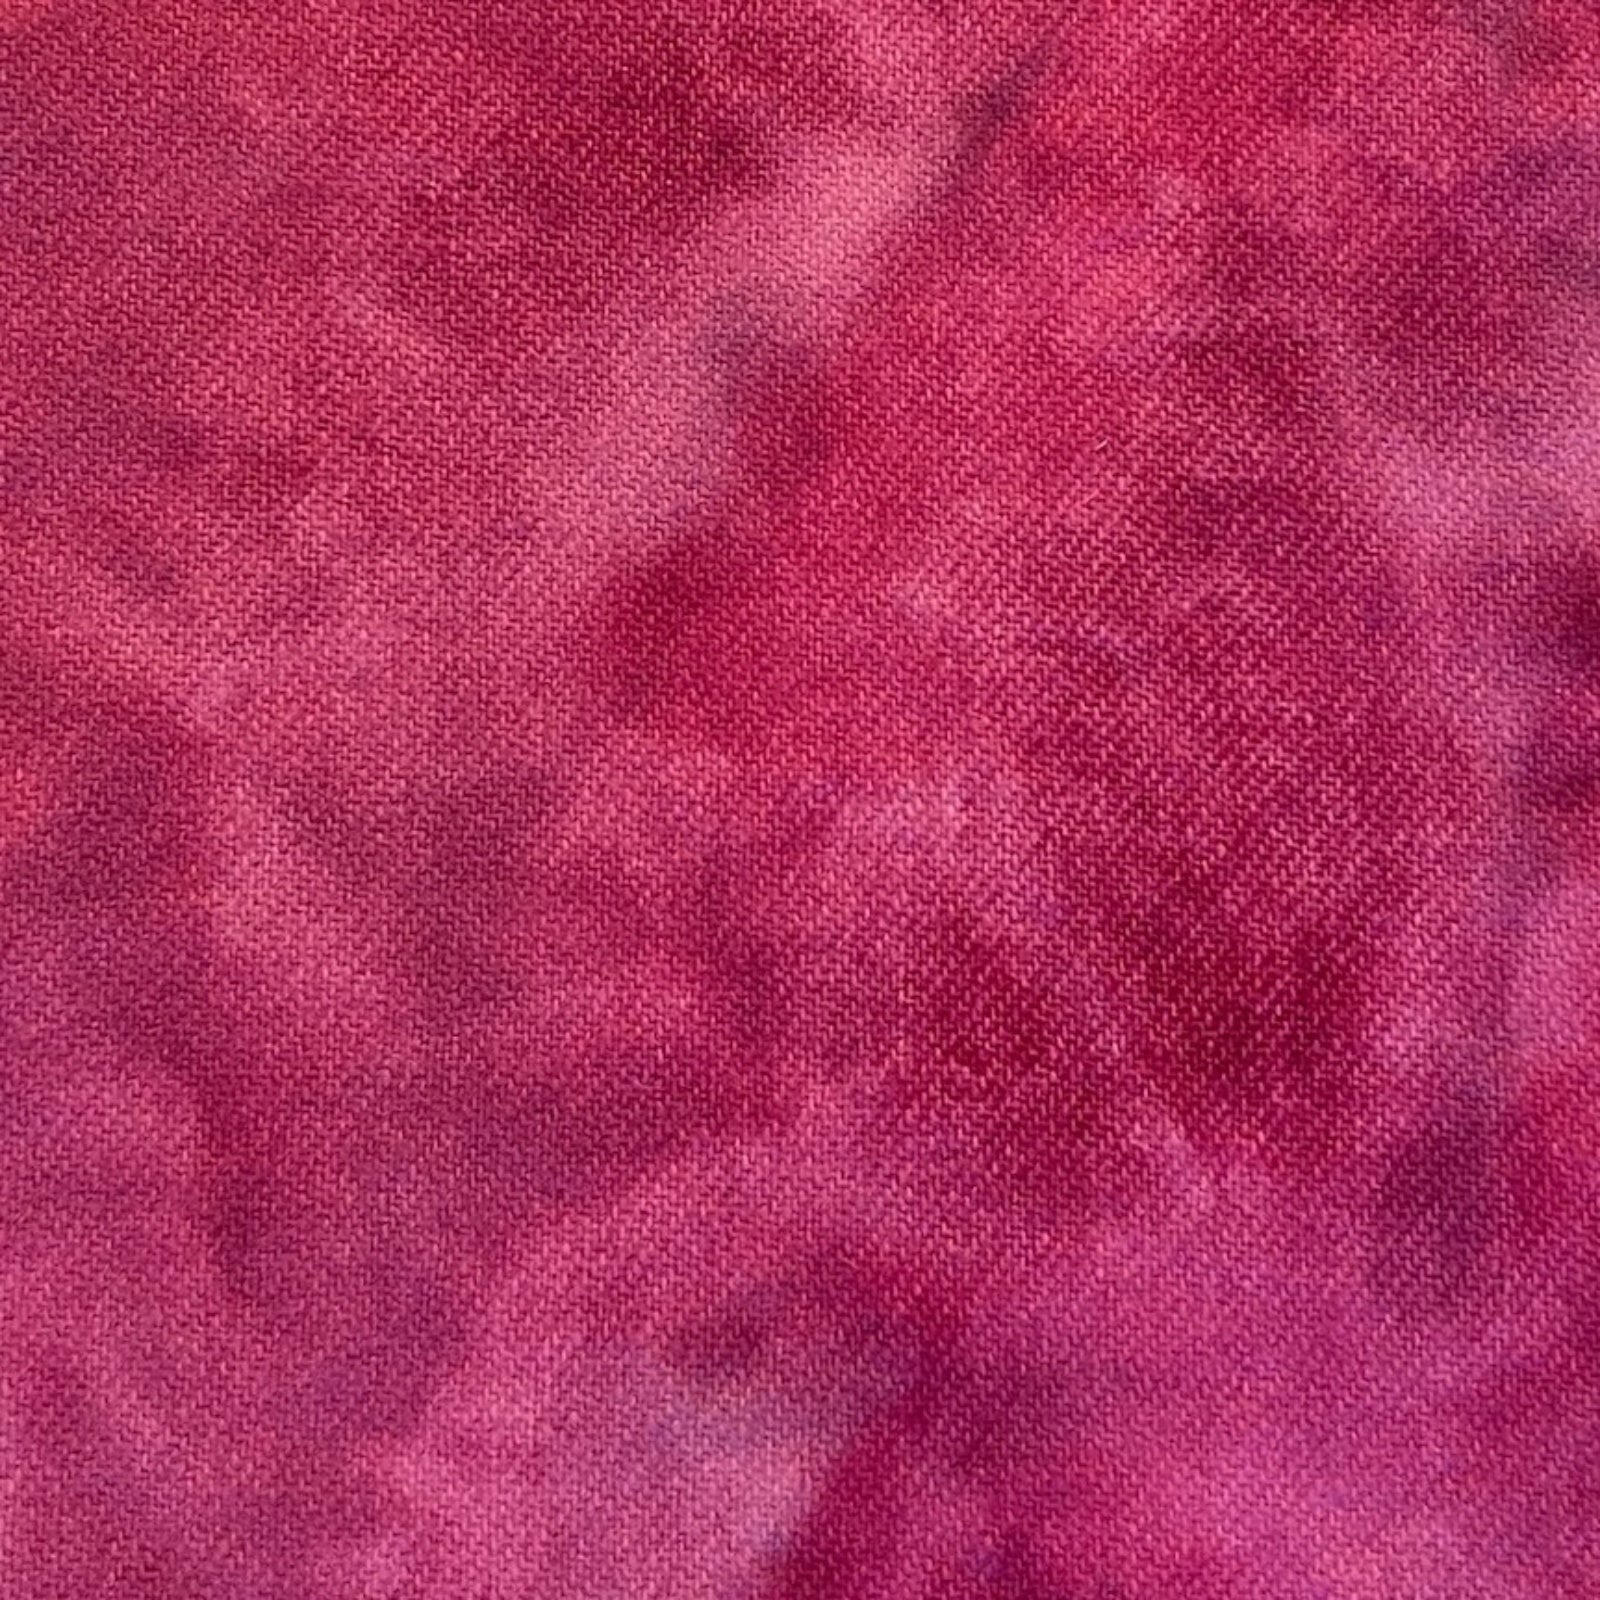 Carnation - Colorama Hand Dyed Wool - Offered by HoneyBee Hive Rug Hooking